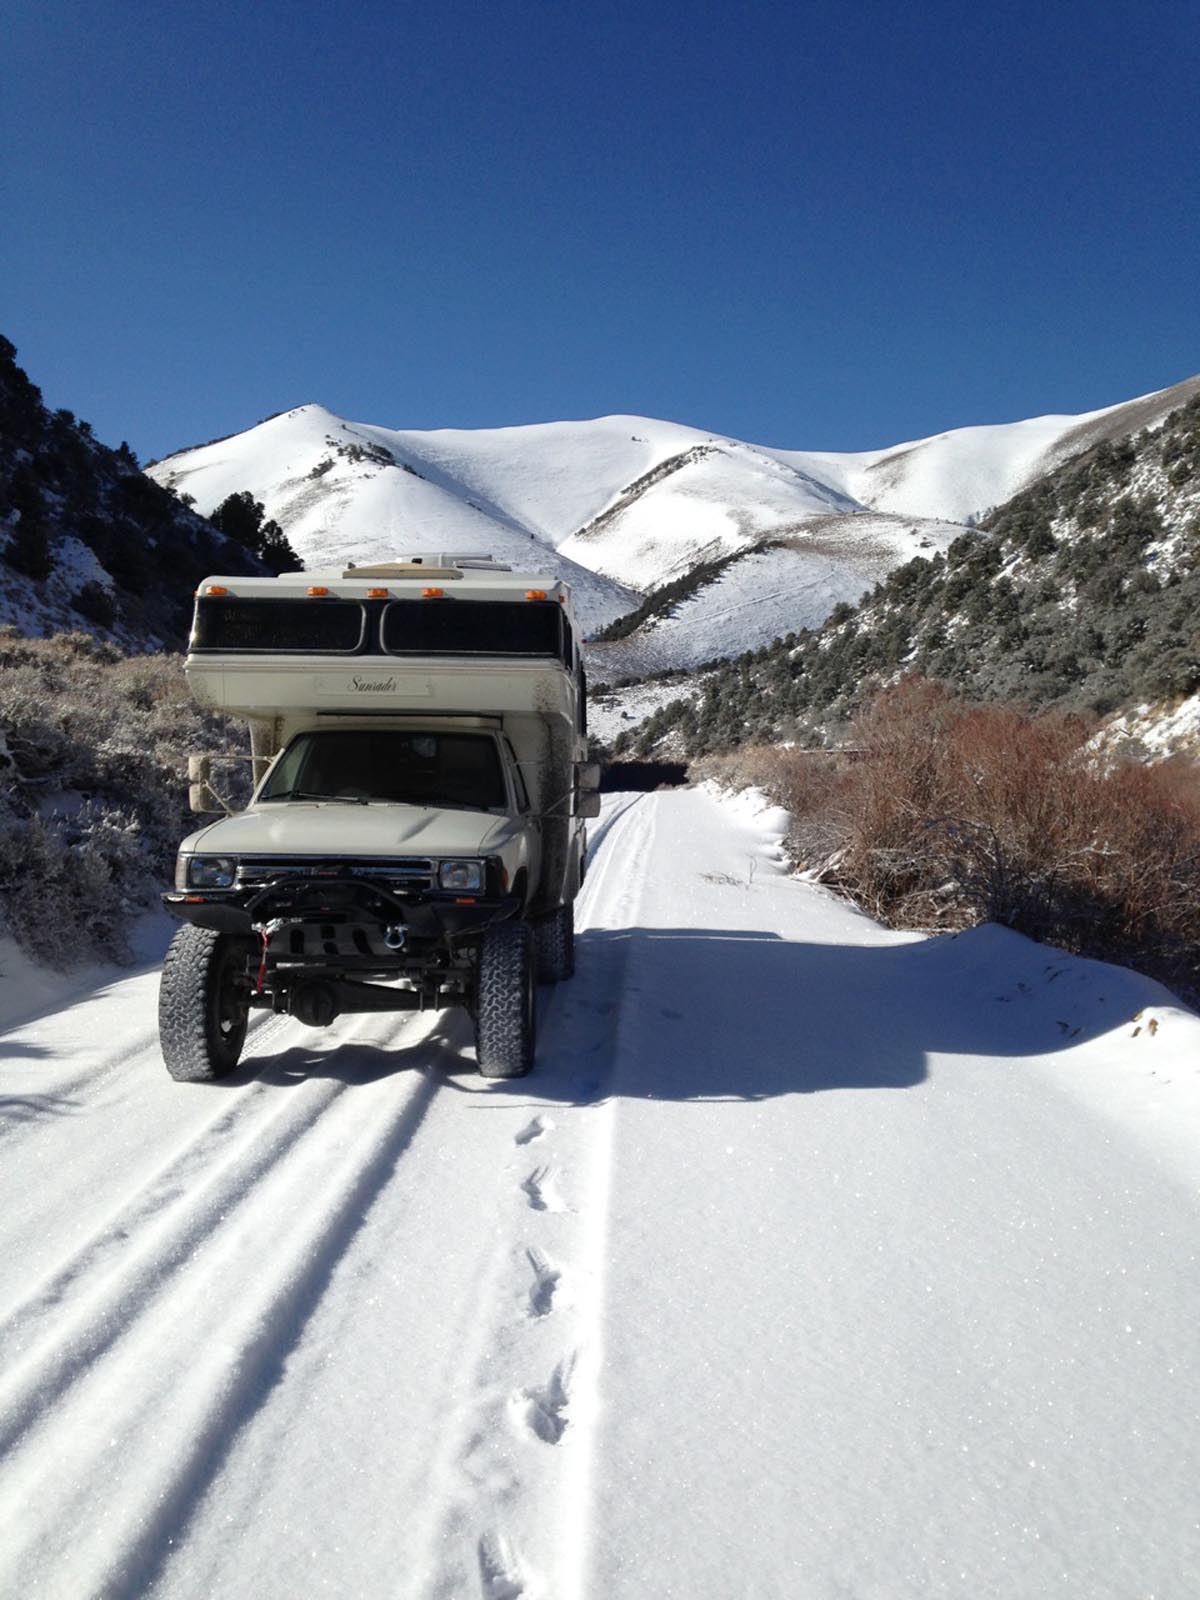 #Vanlife: Kurt Gensheimer shows us his epic Toyota Sunrader & 4WD conversion in the snow